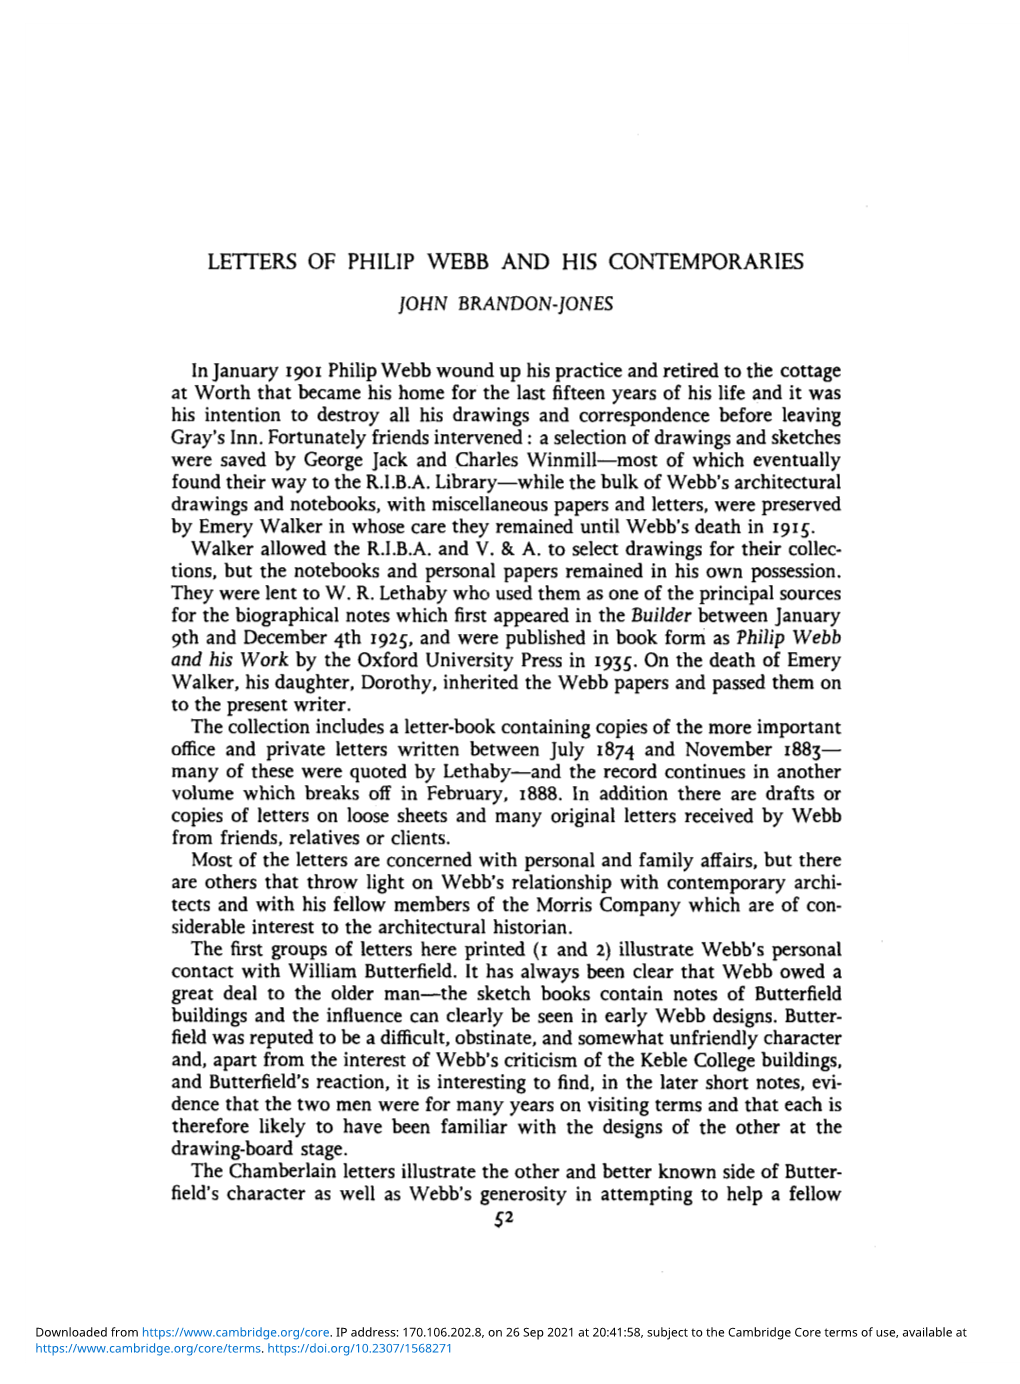 Letters of Philip Webb and His Contemporaries S2